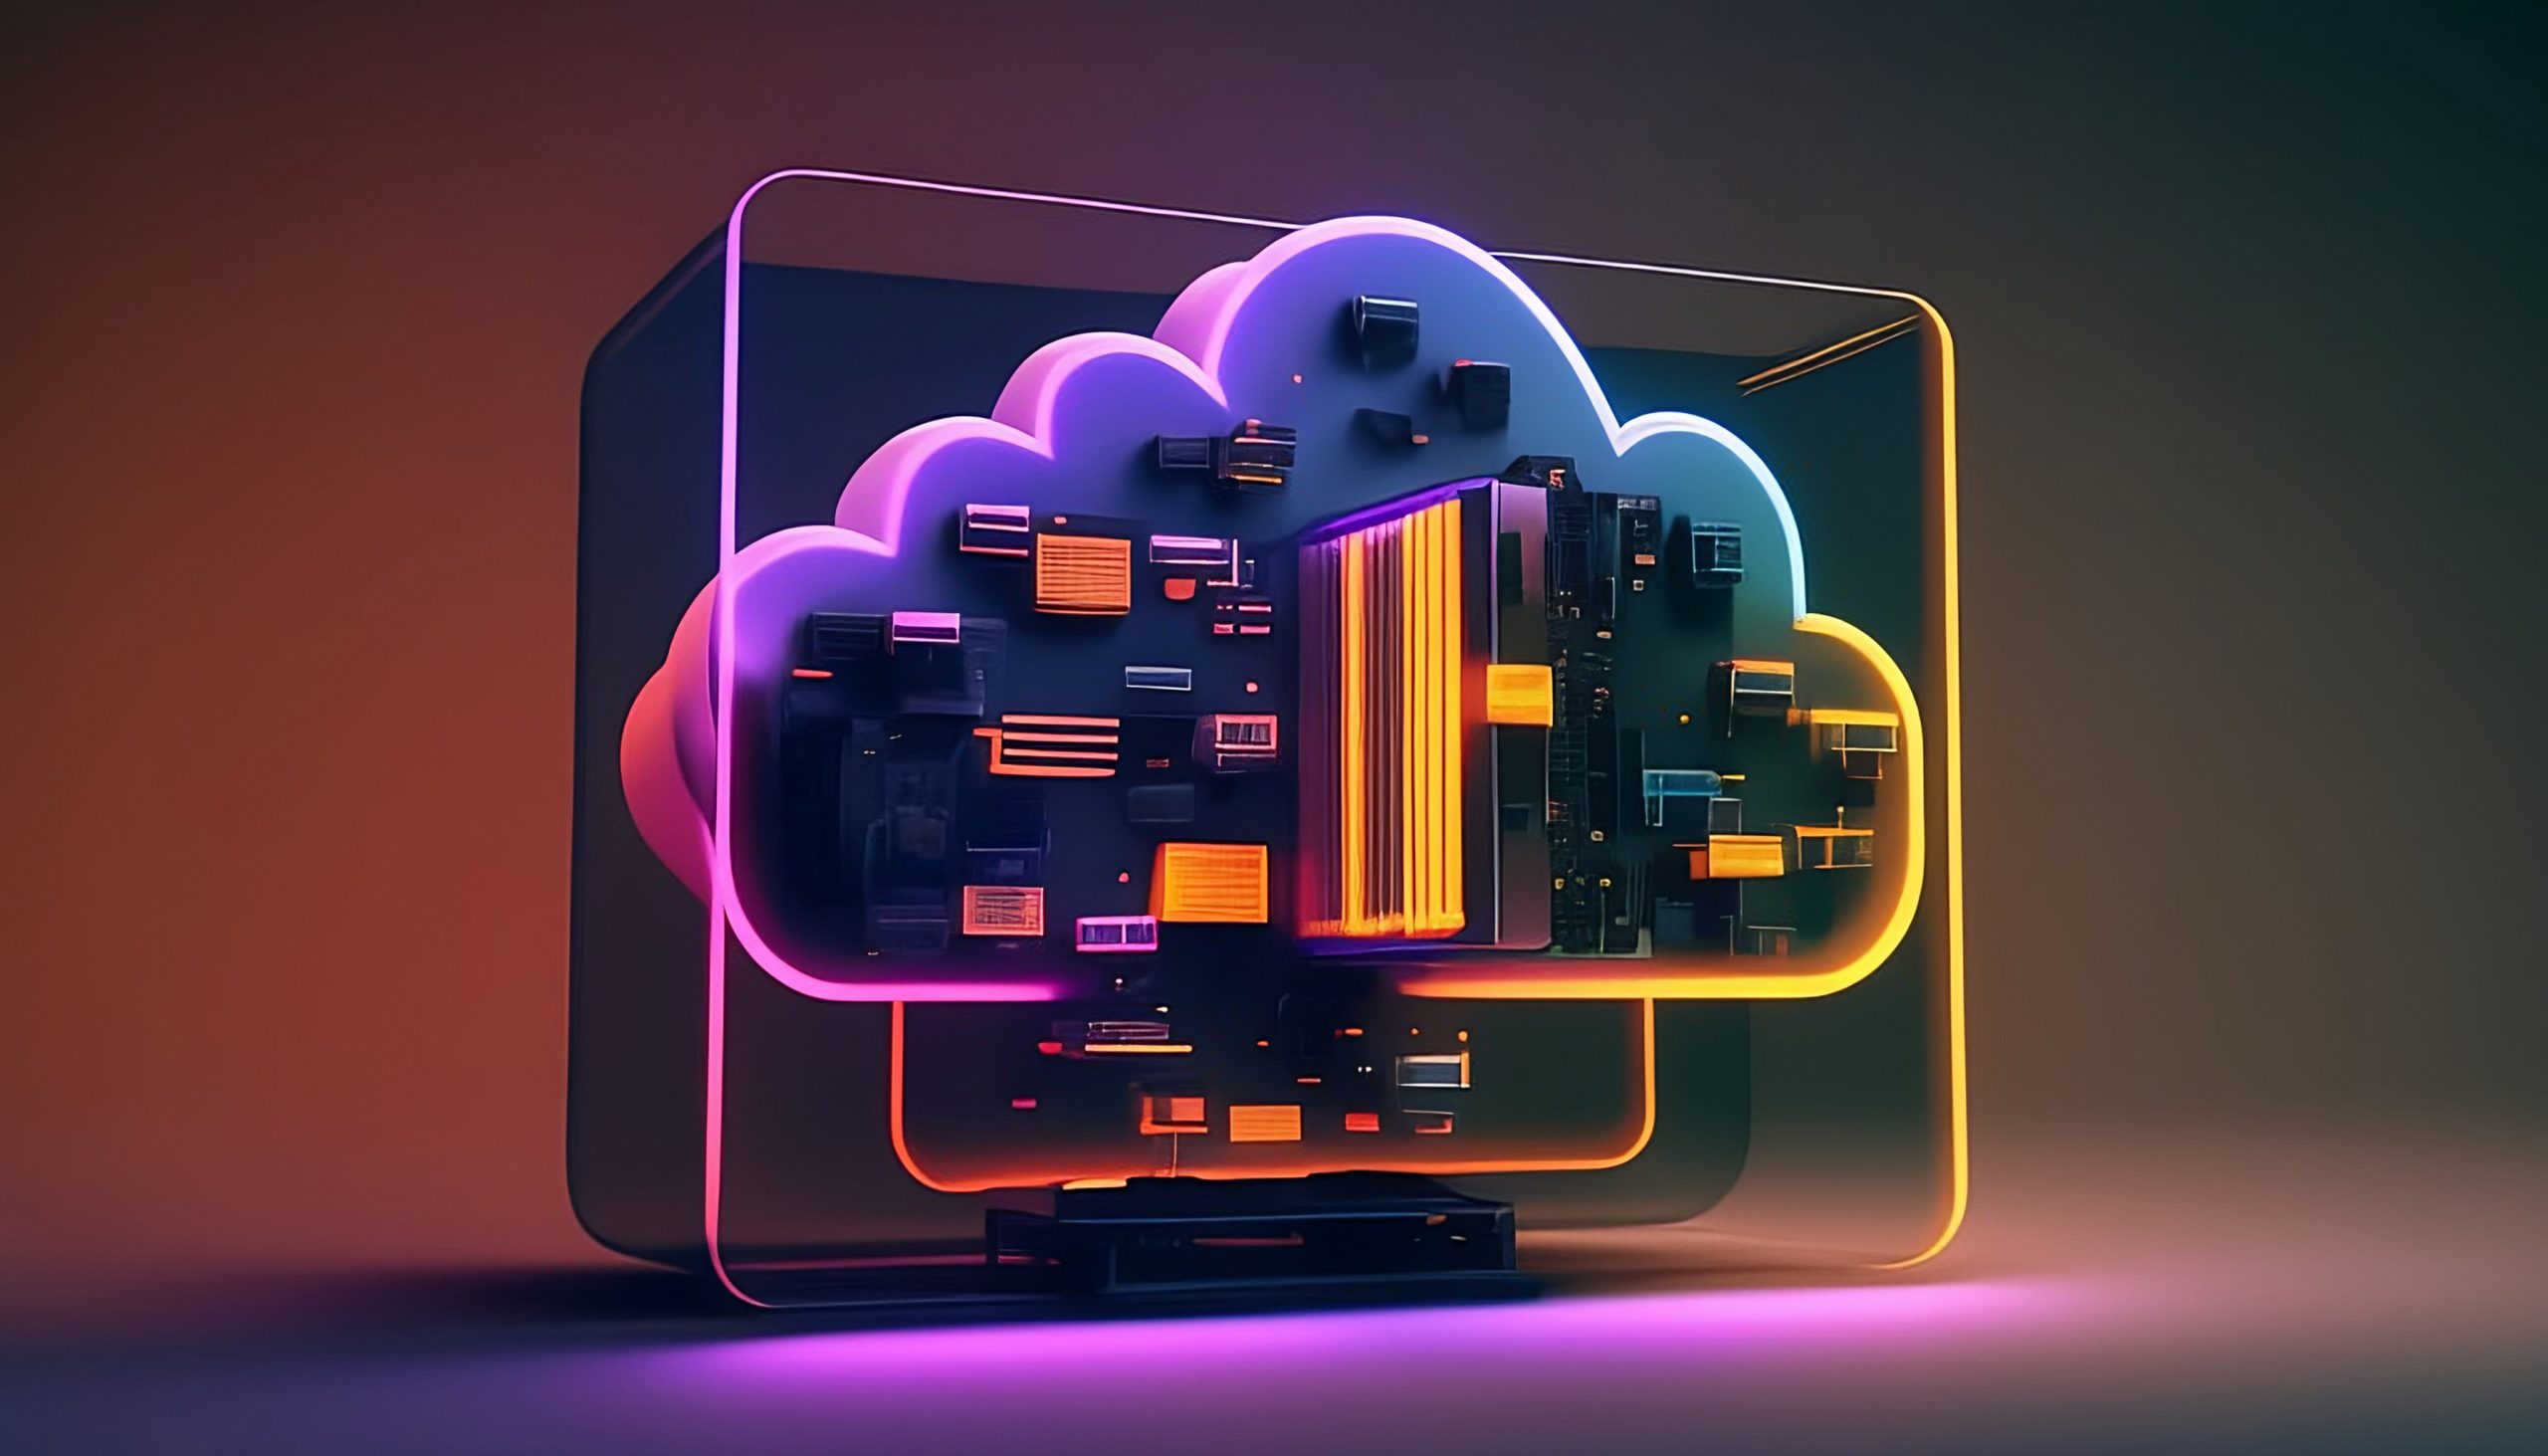 Stylized 3D representation of cloud computing with vibrant colors, showcasing interconnected digital components within a cloud-shaped framework.